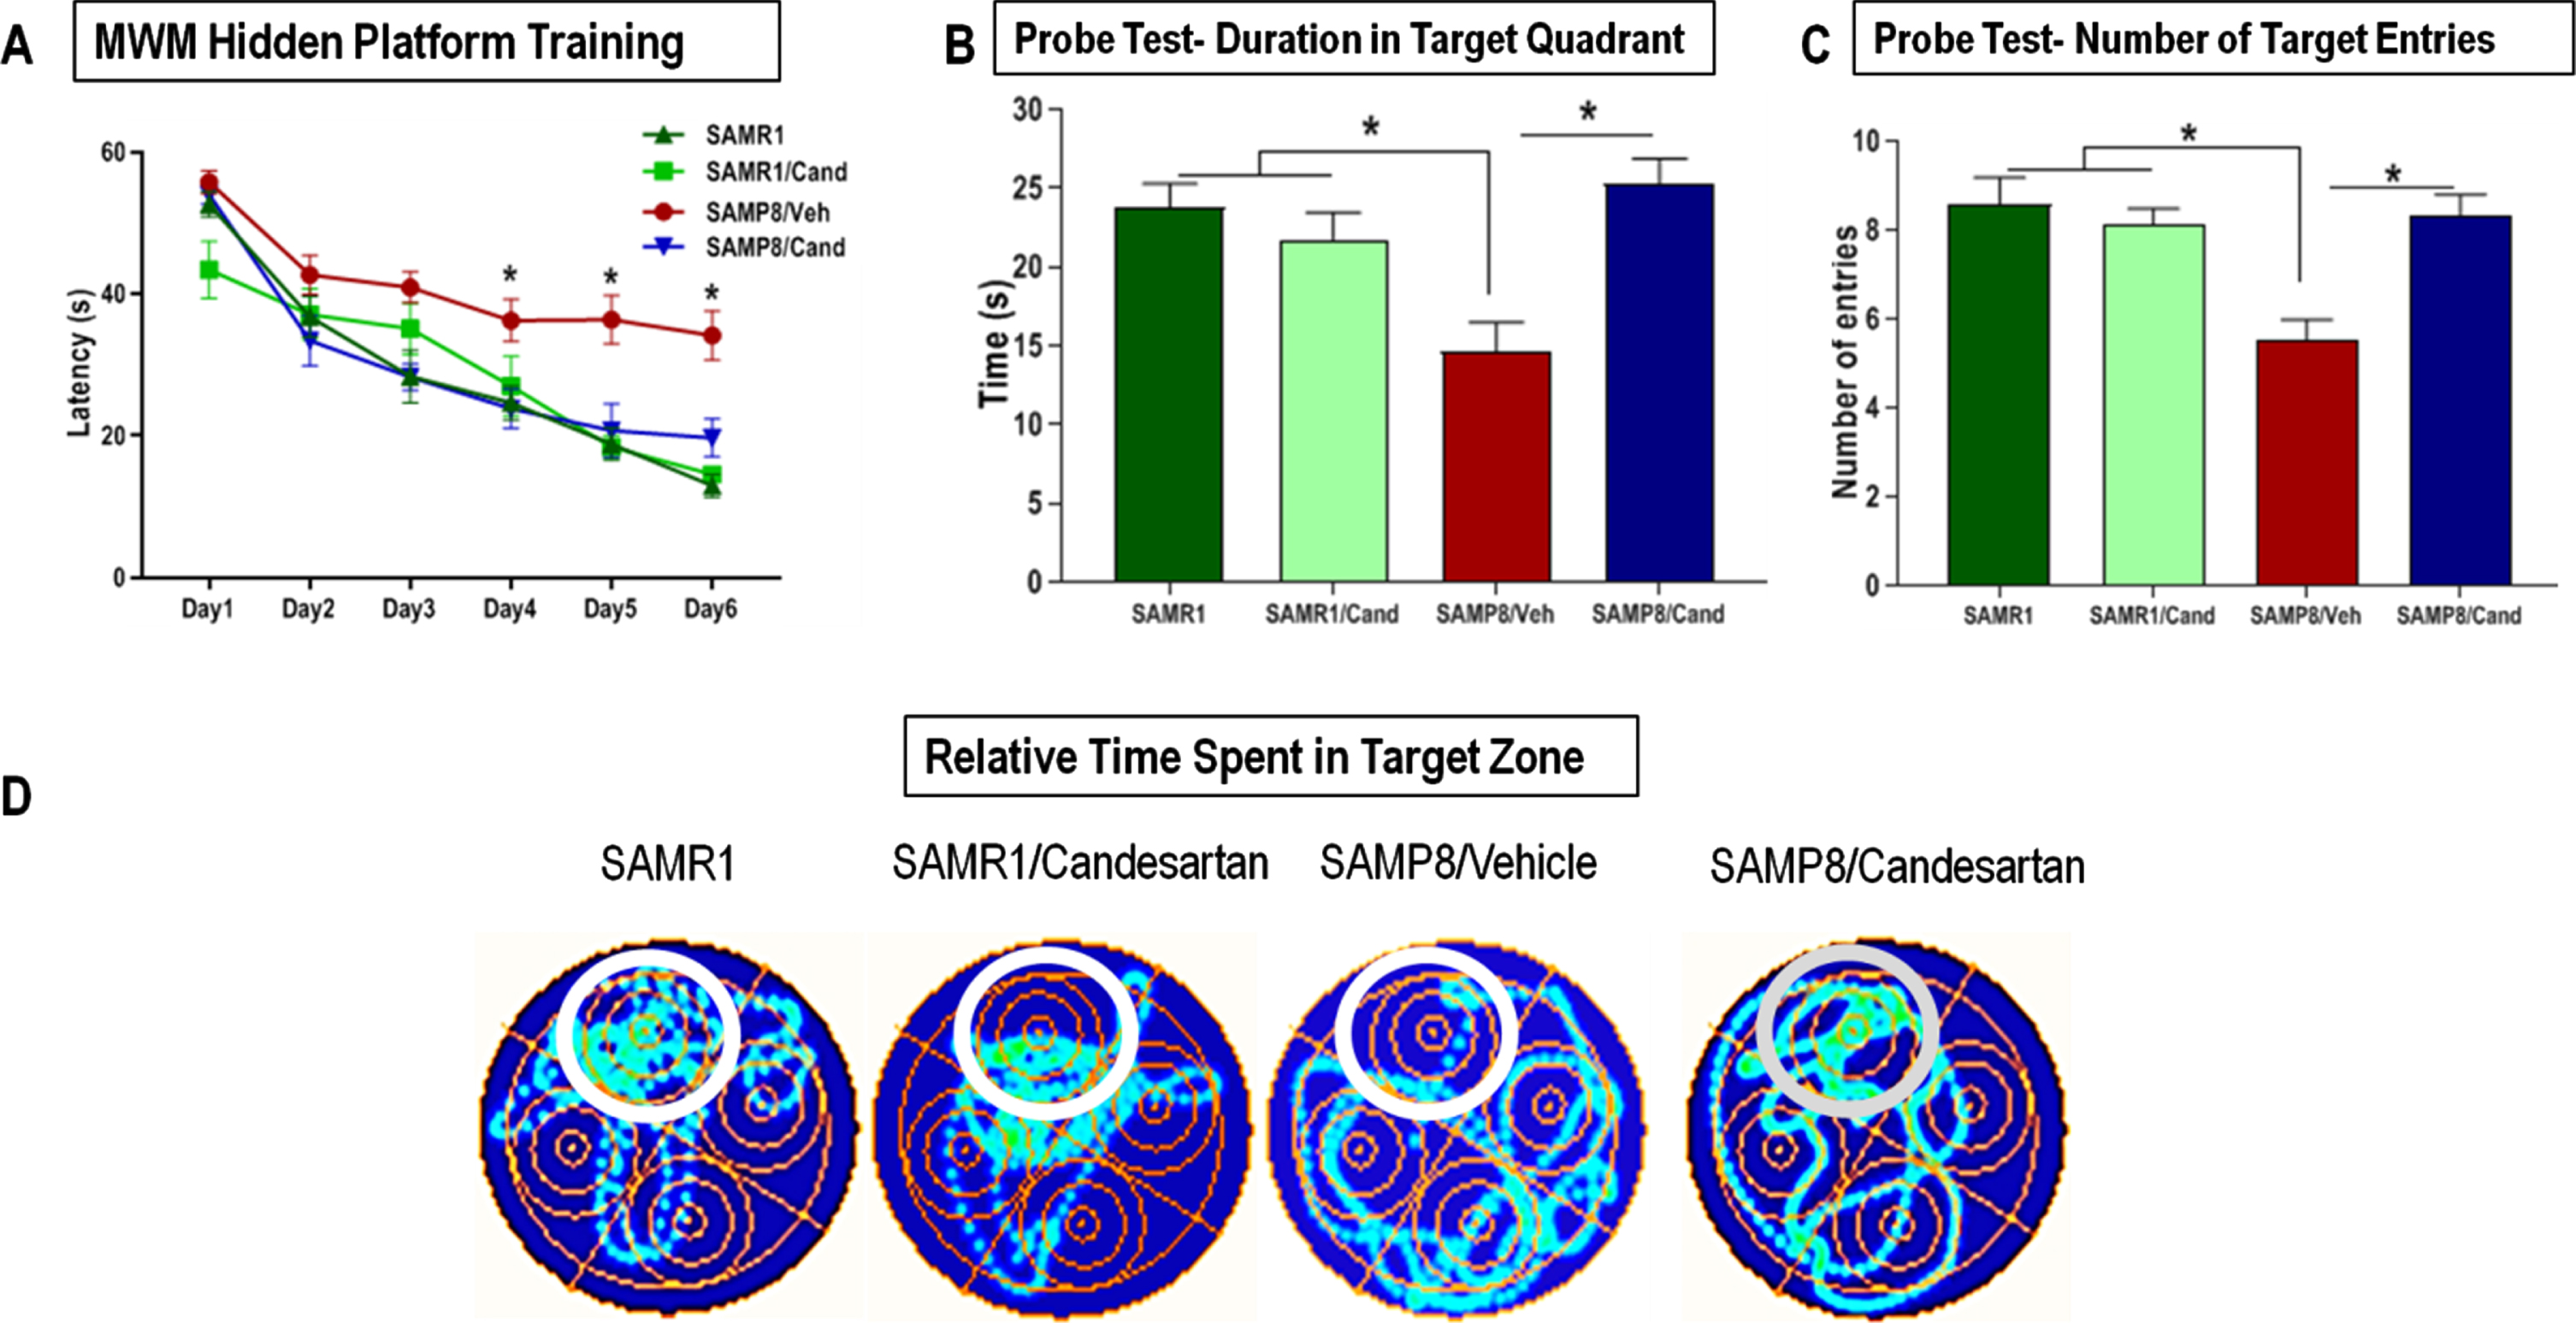 Effect of long-term candesartan treatment on learning, spatial working memory, and long-term/ reference memory retrieval in SAMR1 and SAMP8 mice. A) Learning and spatial working memory were evaluated by animals’ learning curve, the number of sessions it took for animals to acquire the paradigm and use the surrounding cues for spatial navigation of the maze to locate the hidden platform during the training period. The animal is introduced into the maze from various positions and relies on its working memory to reach the target. Long-term reference memory was determined by the probe test. Performance was evaluated by measuring the (B) time spent in the target quadrant as well as (C) number of target entries. D) Heat maps illustrating relative time spent in the various locations during the probe test (n ≈ 10 animals/group). Symbols and error bars indicate mean±SEM. One-way ANOVA or repeated-measures ANOVA mixed models were used to examine differences in outcomes between the 4 groups over time for the 6-day training, with statistical significance for post hoc pair-wise comparisons, denoted by *p < 0.05.